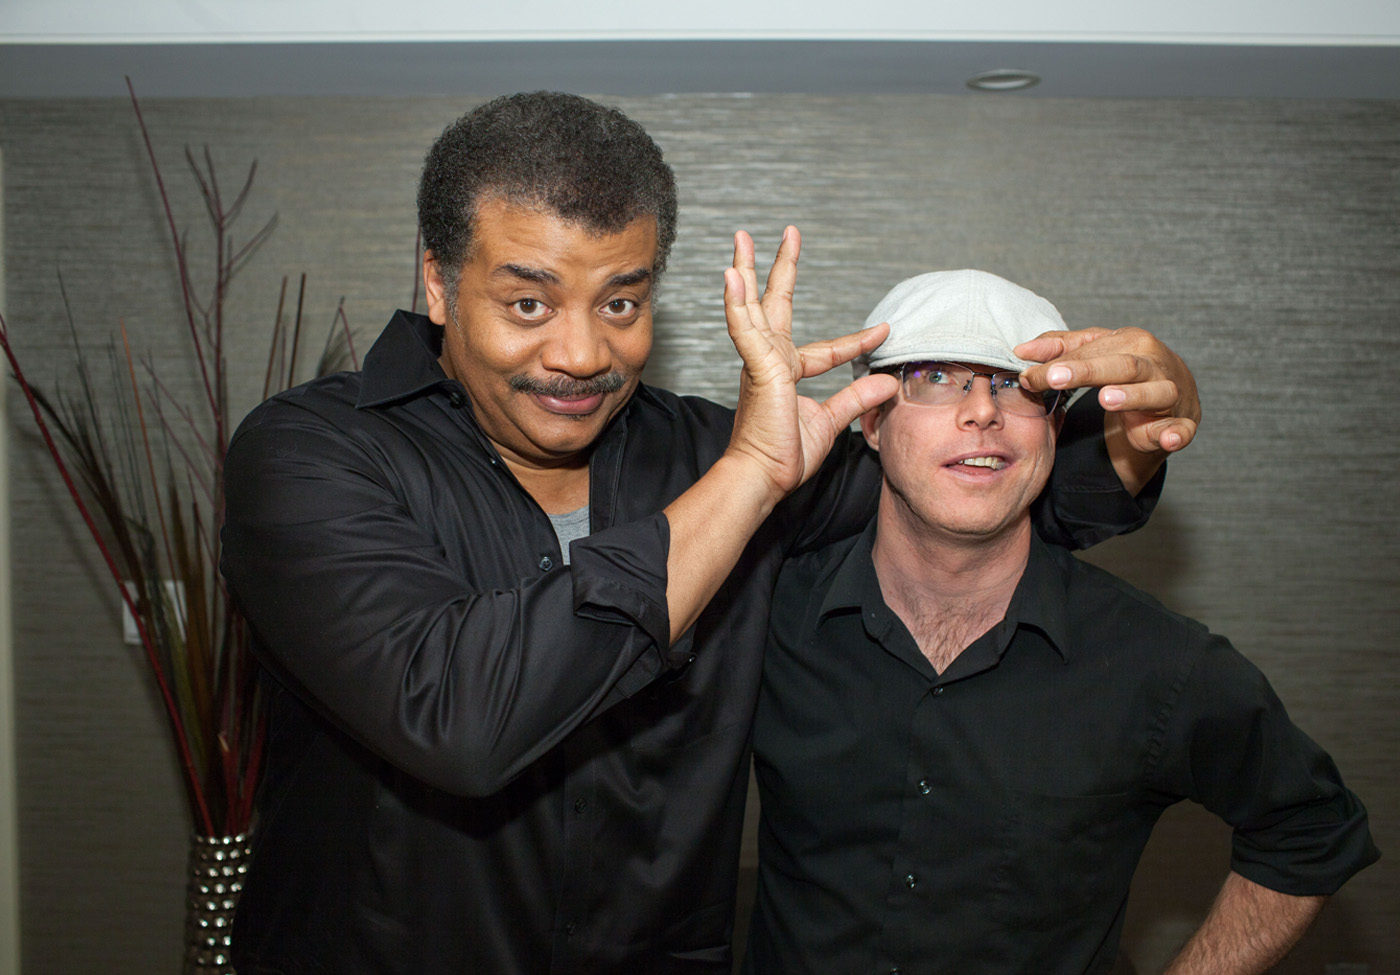 Photo of Neil deGrasse Tyson and "The Martian" author Andy Weir, taken by Brandon Royal.